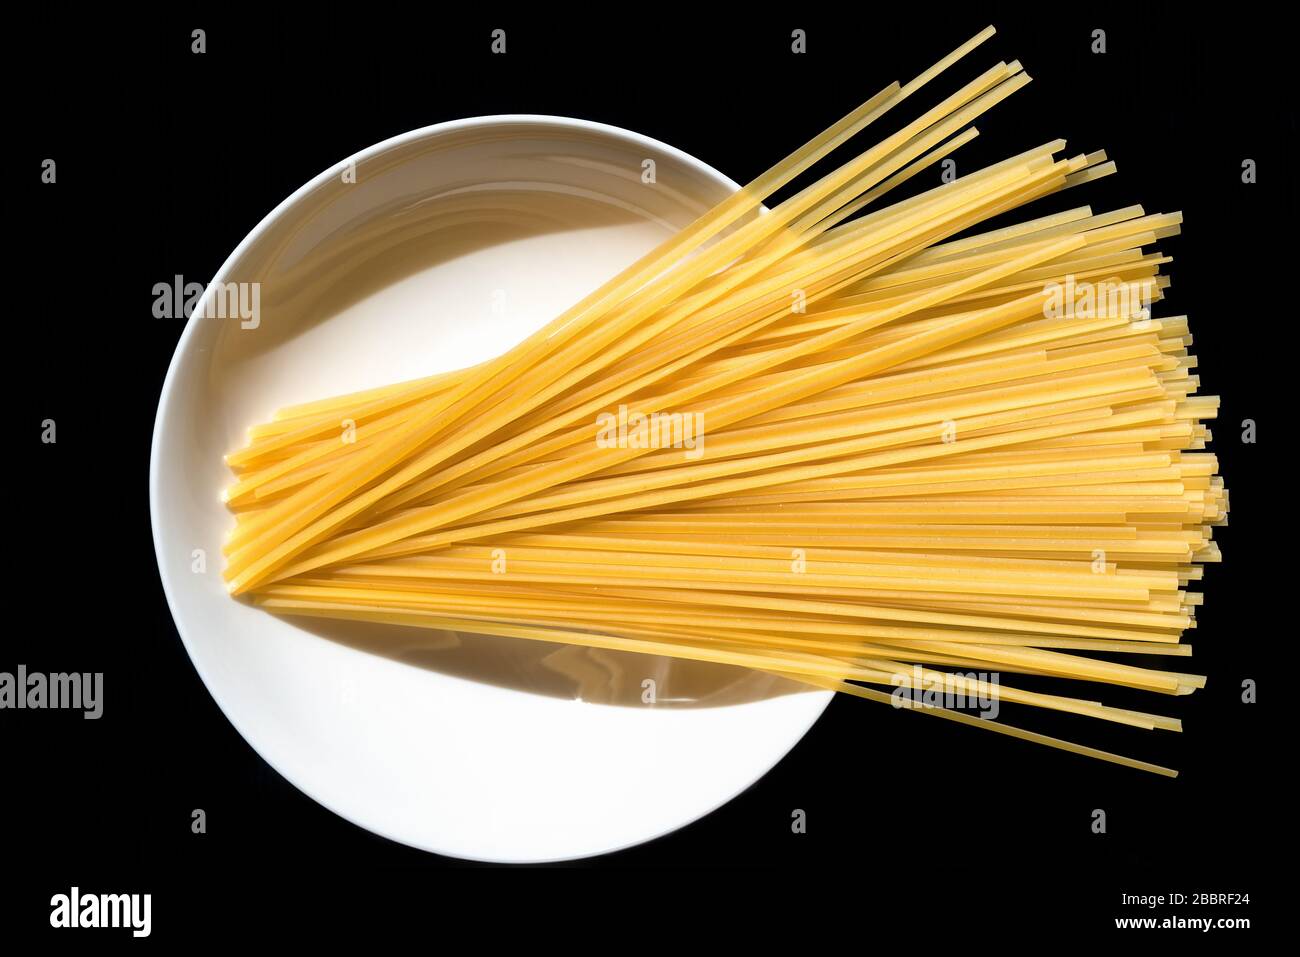 Original raw Italian pasta on a white  plate. Linguine ready to be cooked. Italian cuisine ingredient concept. Stock Photo